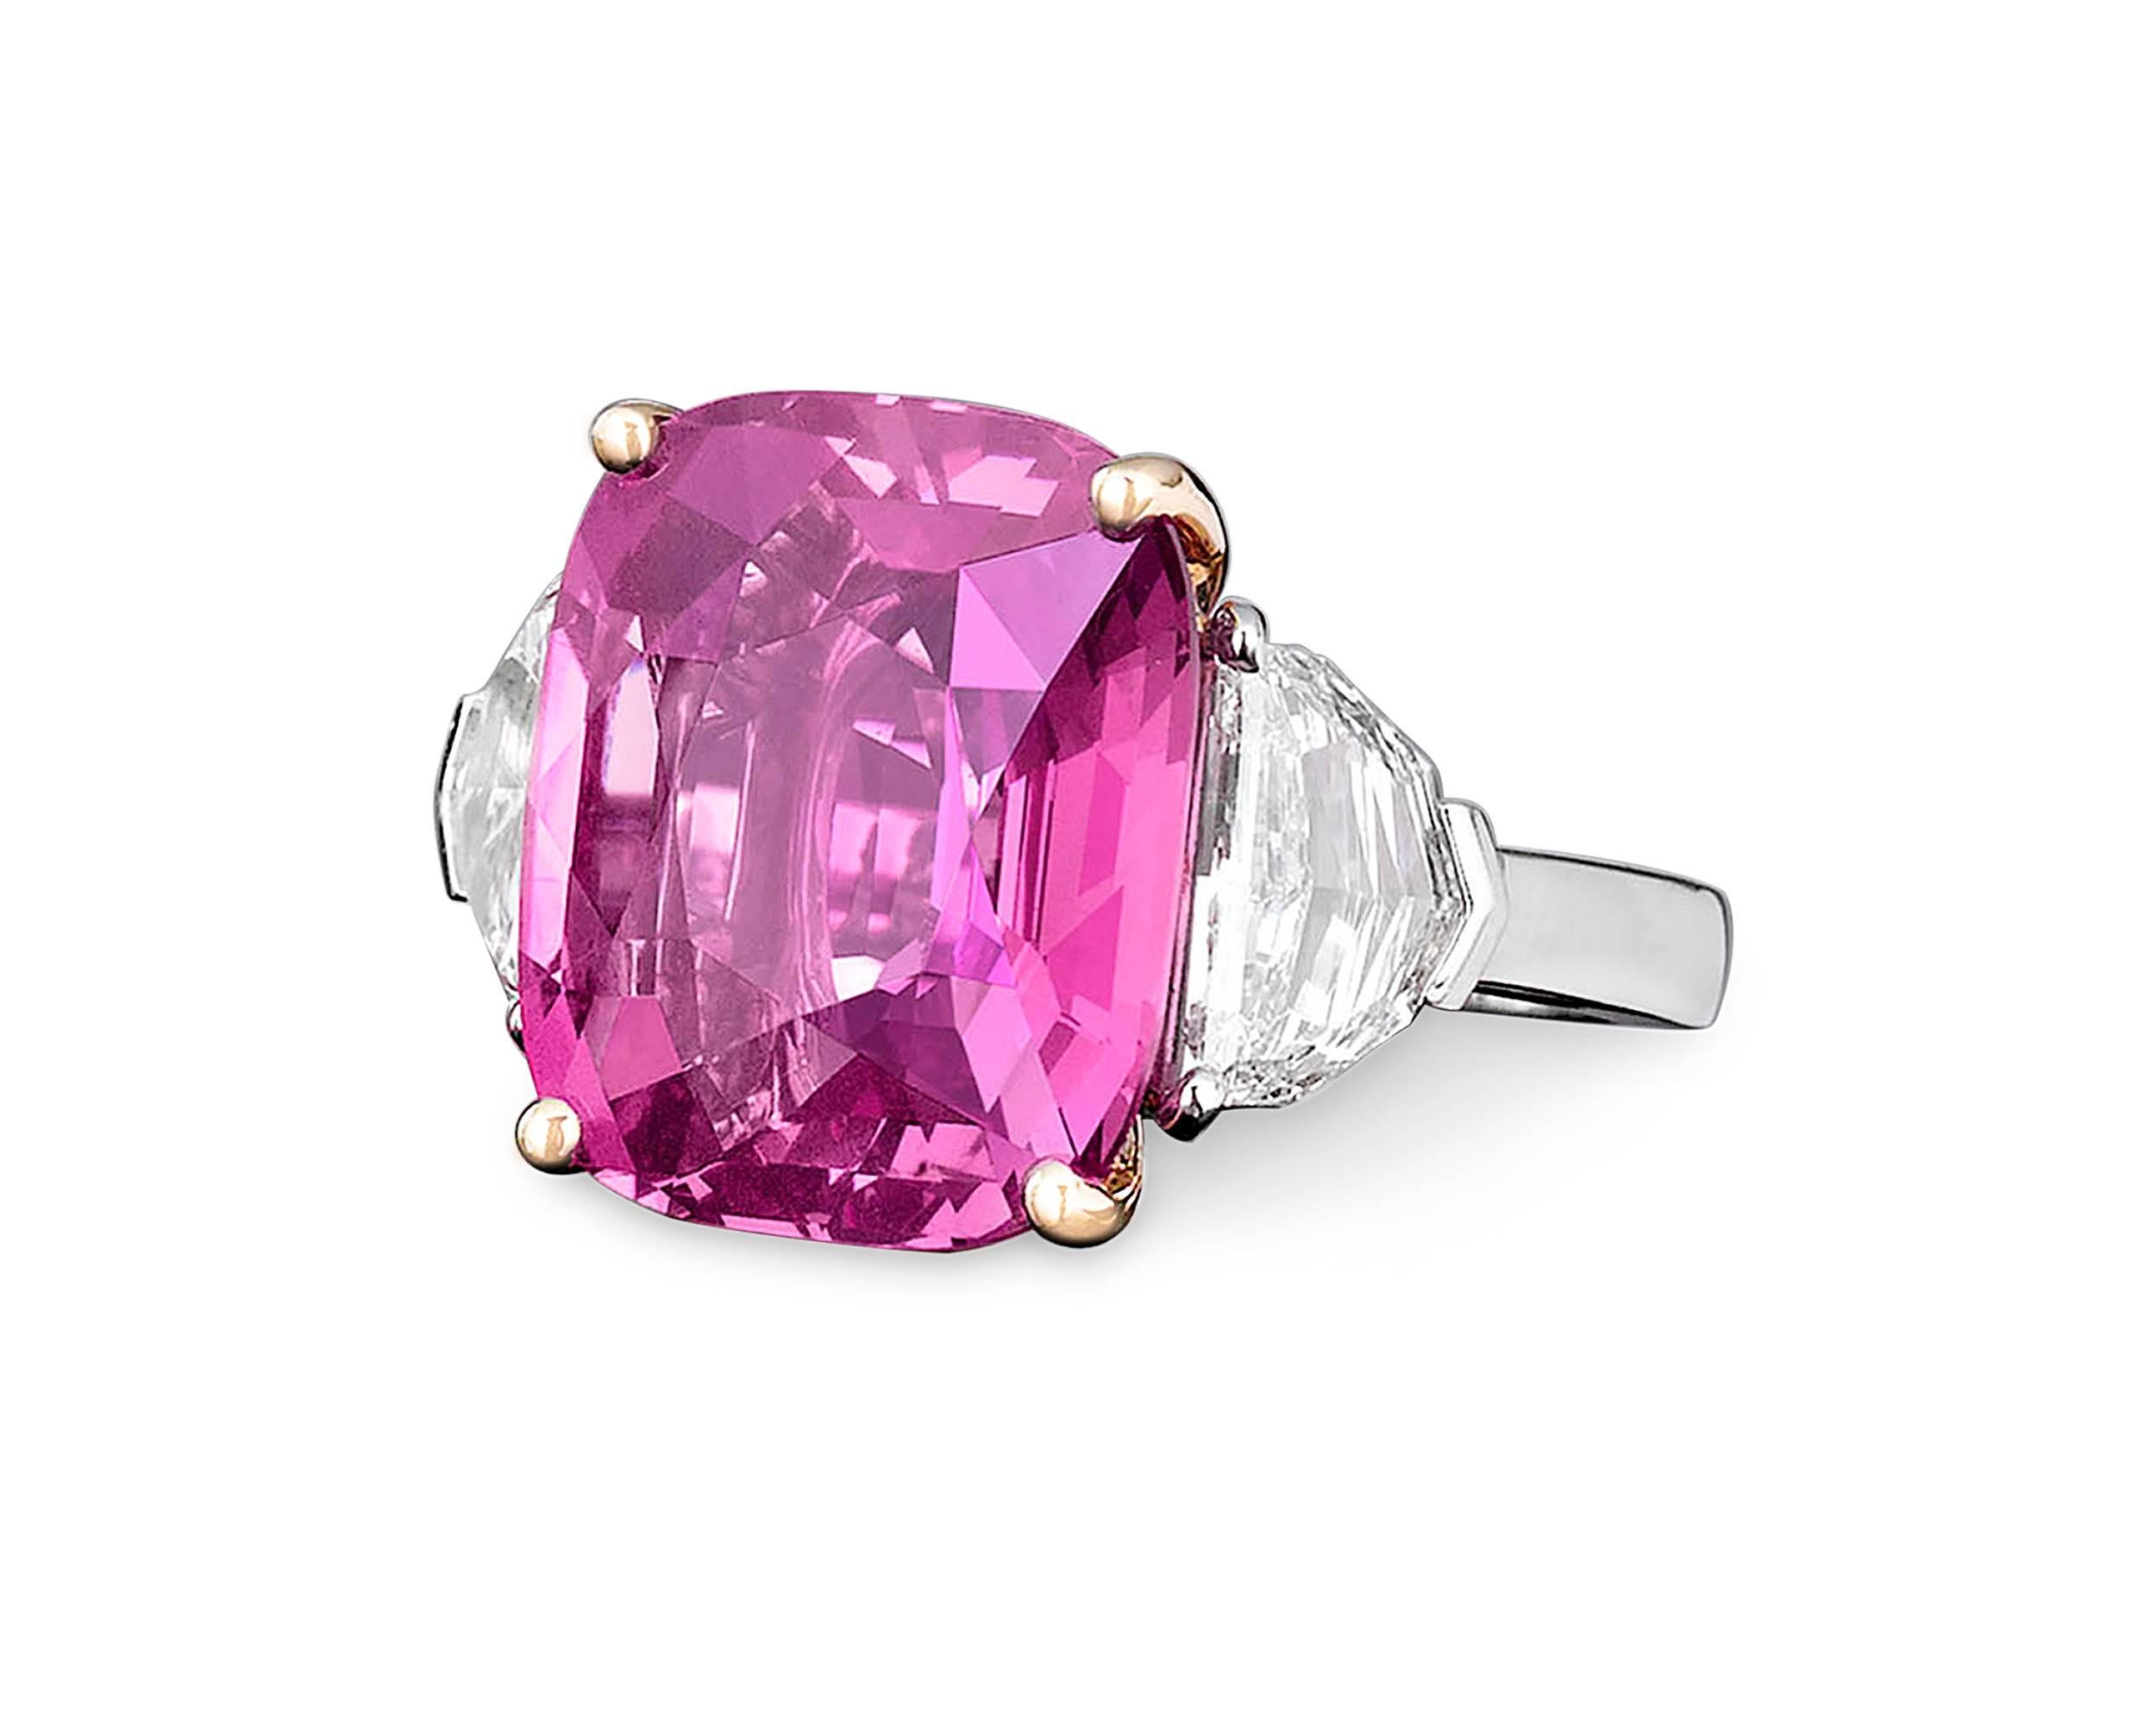 An extraordinarily rare, 16.37-carat Pink Ceylon sapphire takes center stage in this striking ring. Displaying the perfect purplish-pink bubblegum hue for which the finest pink sapphires are so beloved, this enchanting, cushion-shape gem boasts both